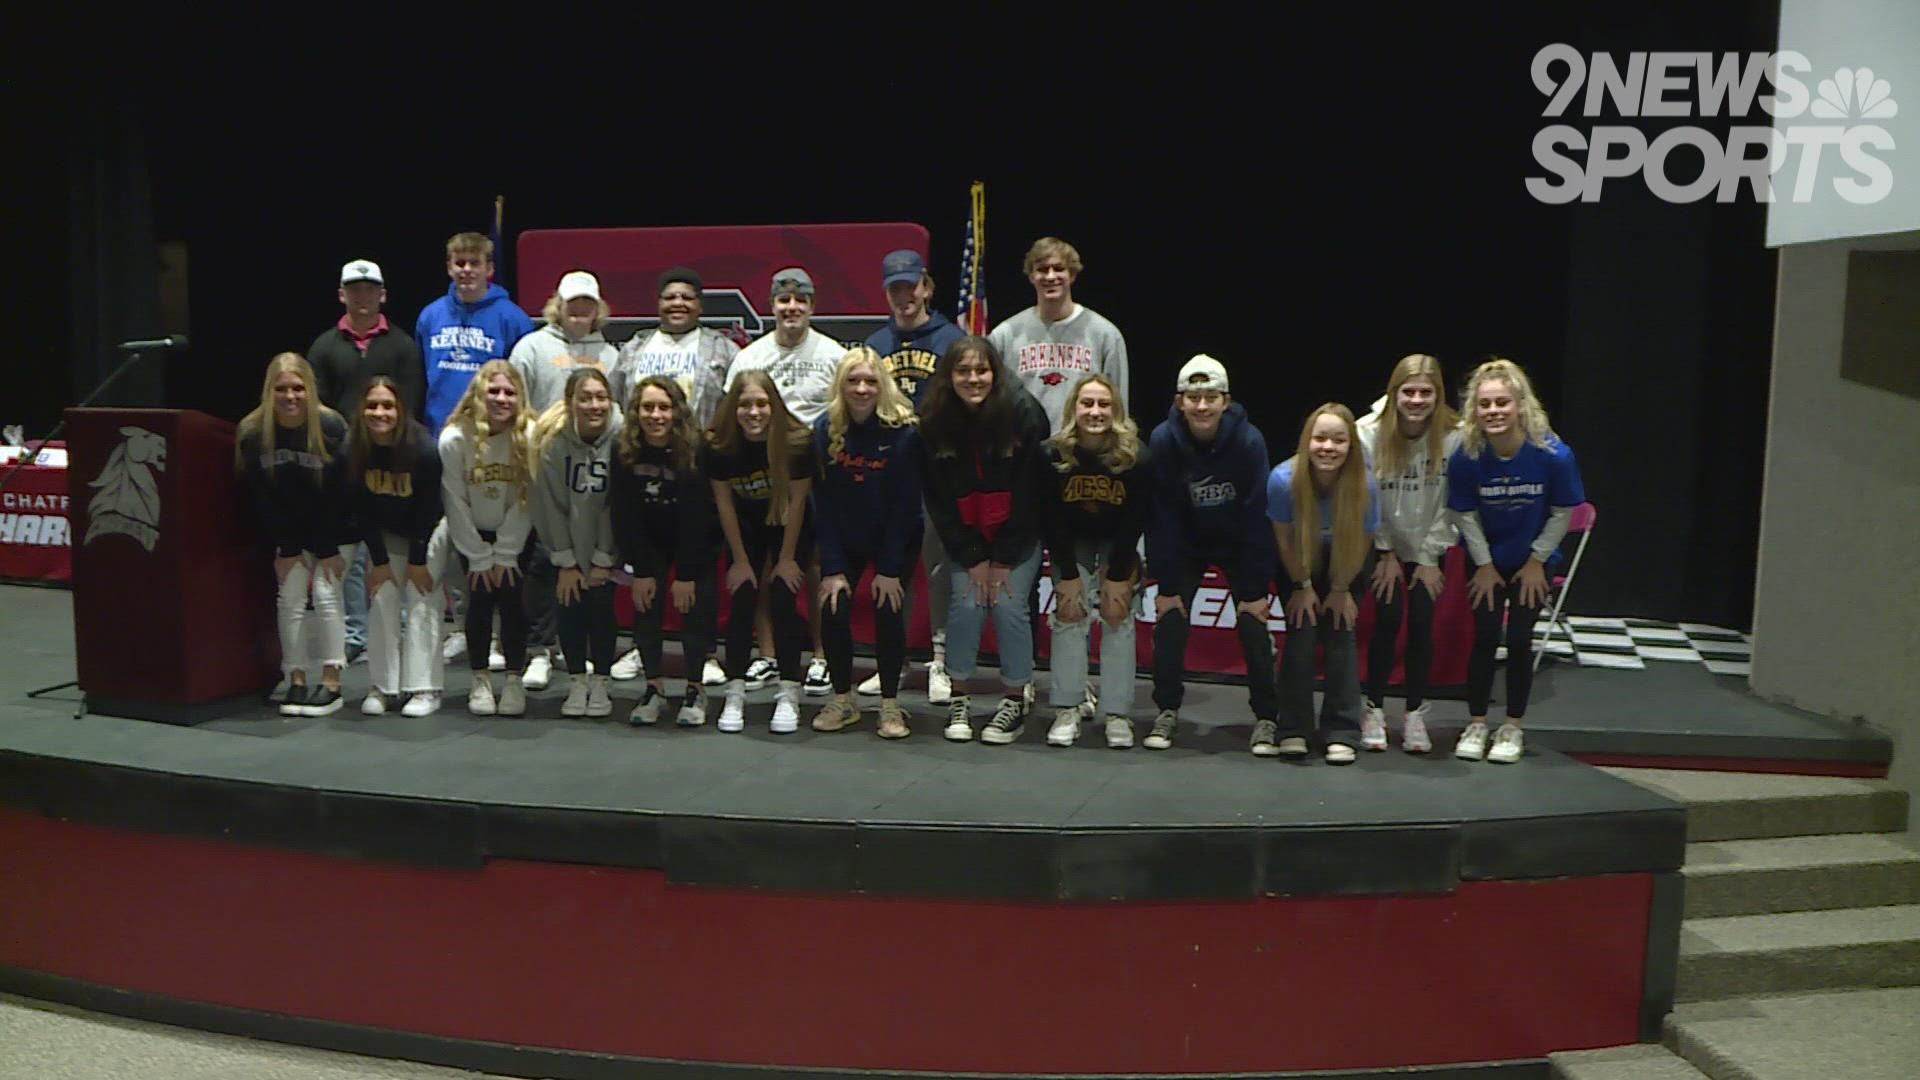 Watch as student-athletes from Chatfield sign their National Letters of Intent to play at college and reflect on their careers